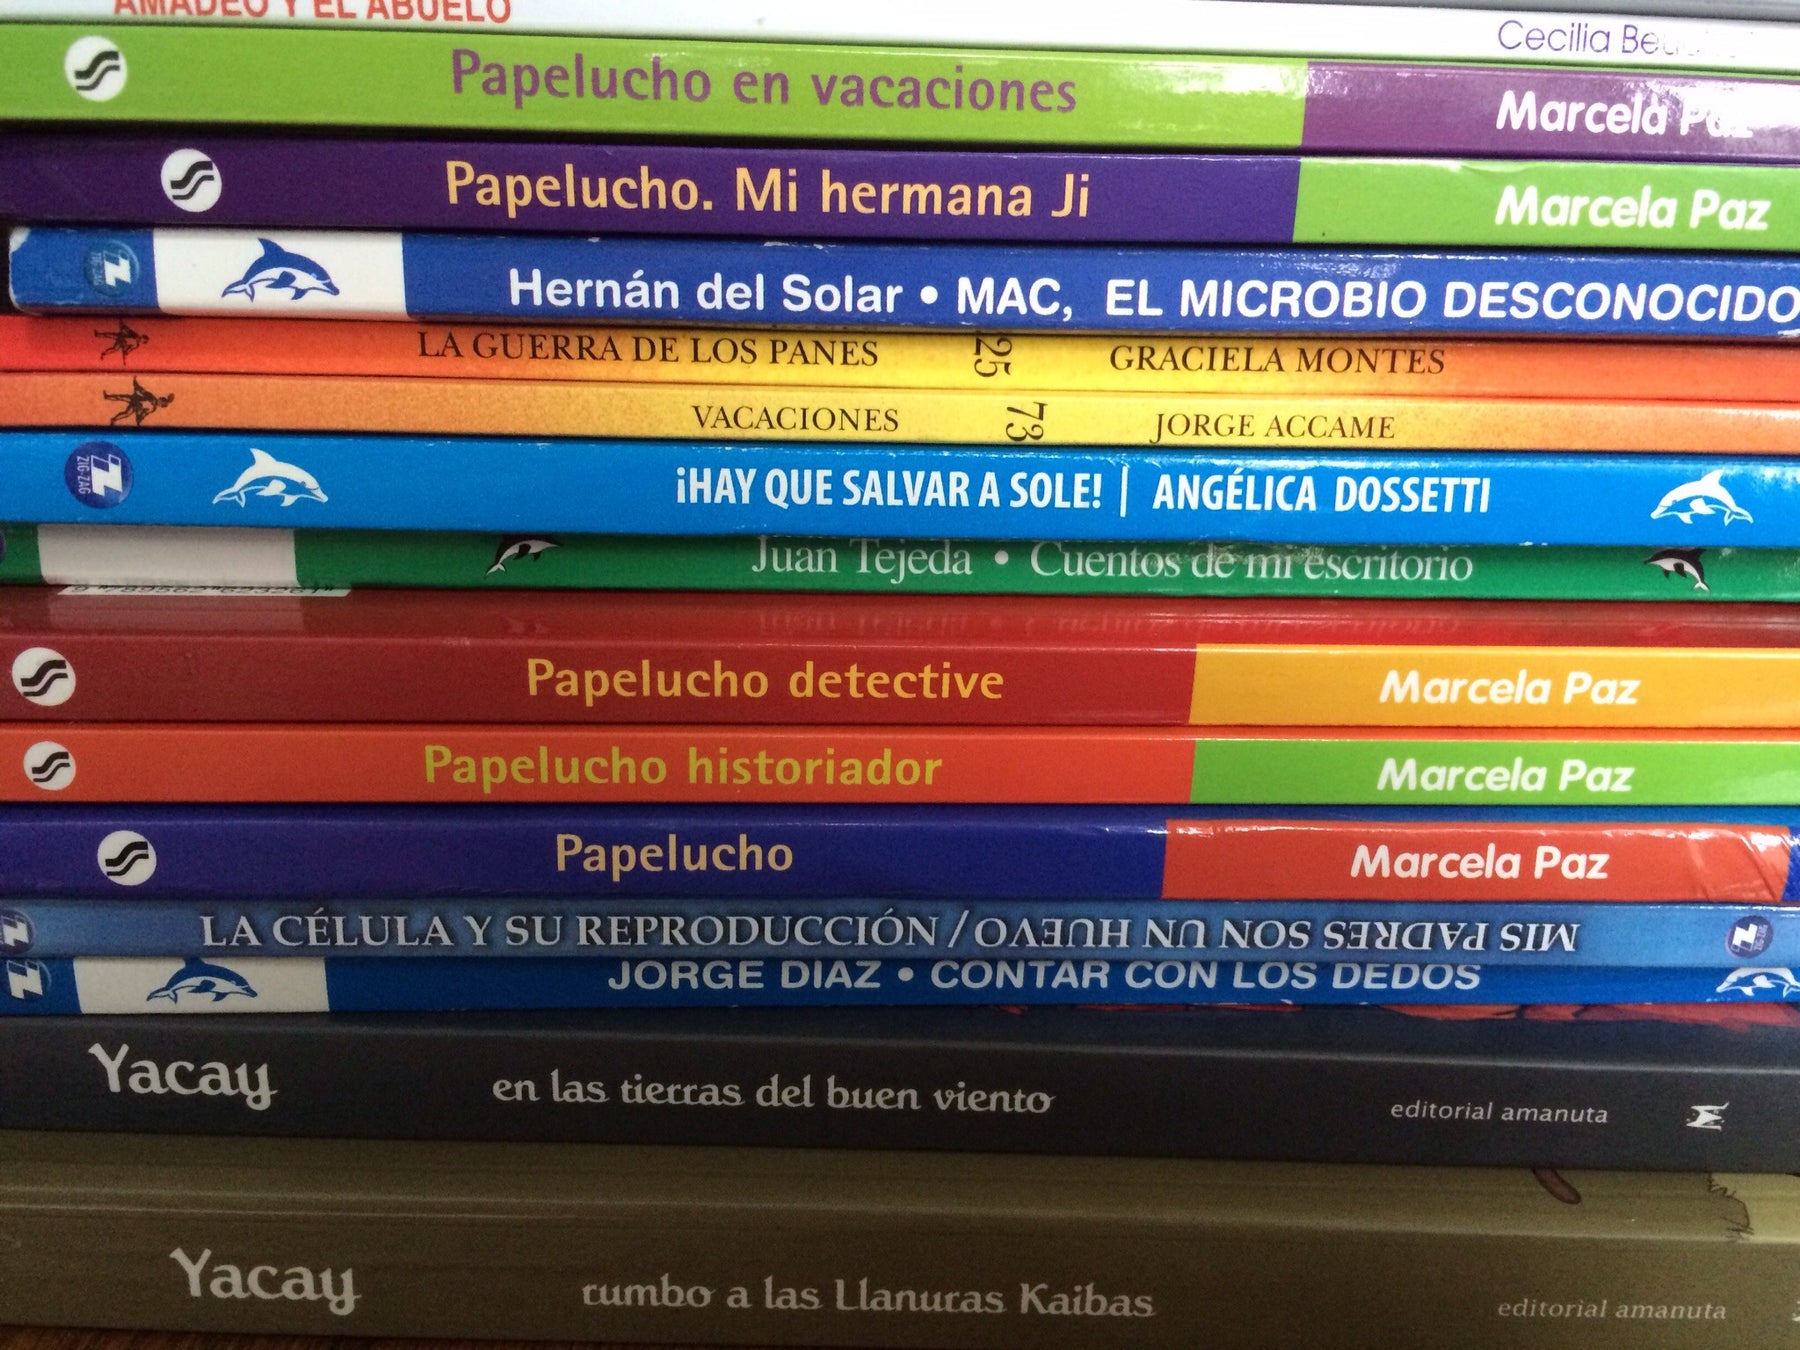 image of the spines of a stack of books